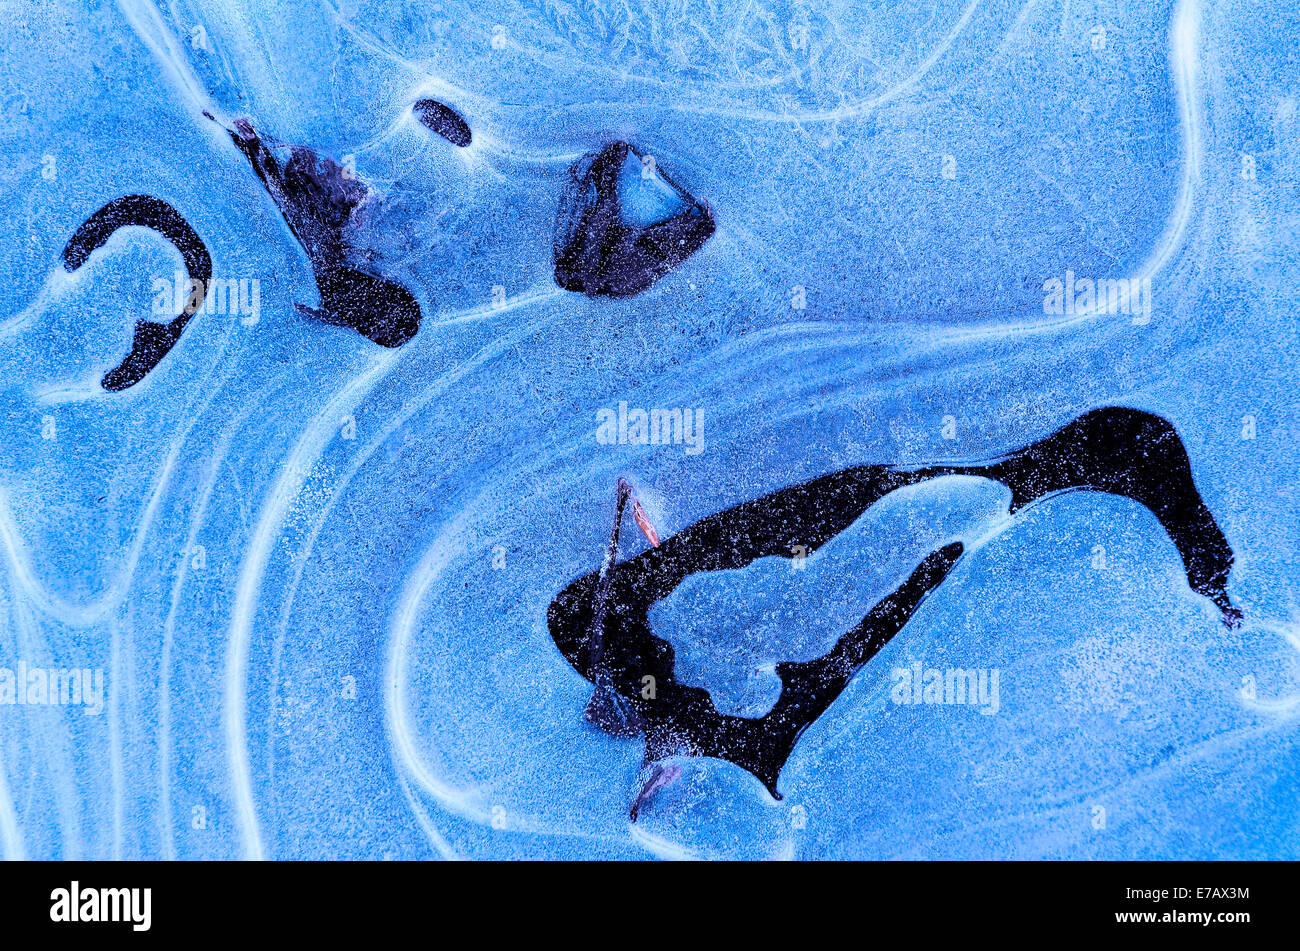 Frozen creek resulting in translucent blue ice crystal patterns Stock Photo